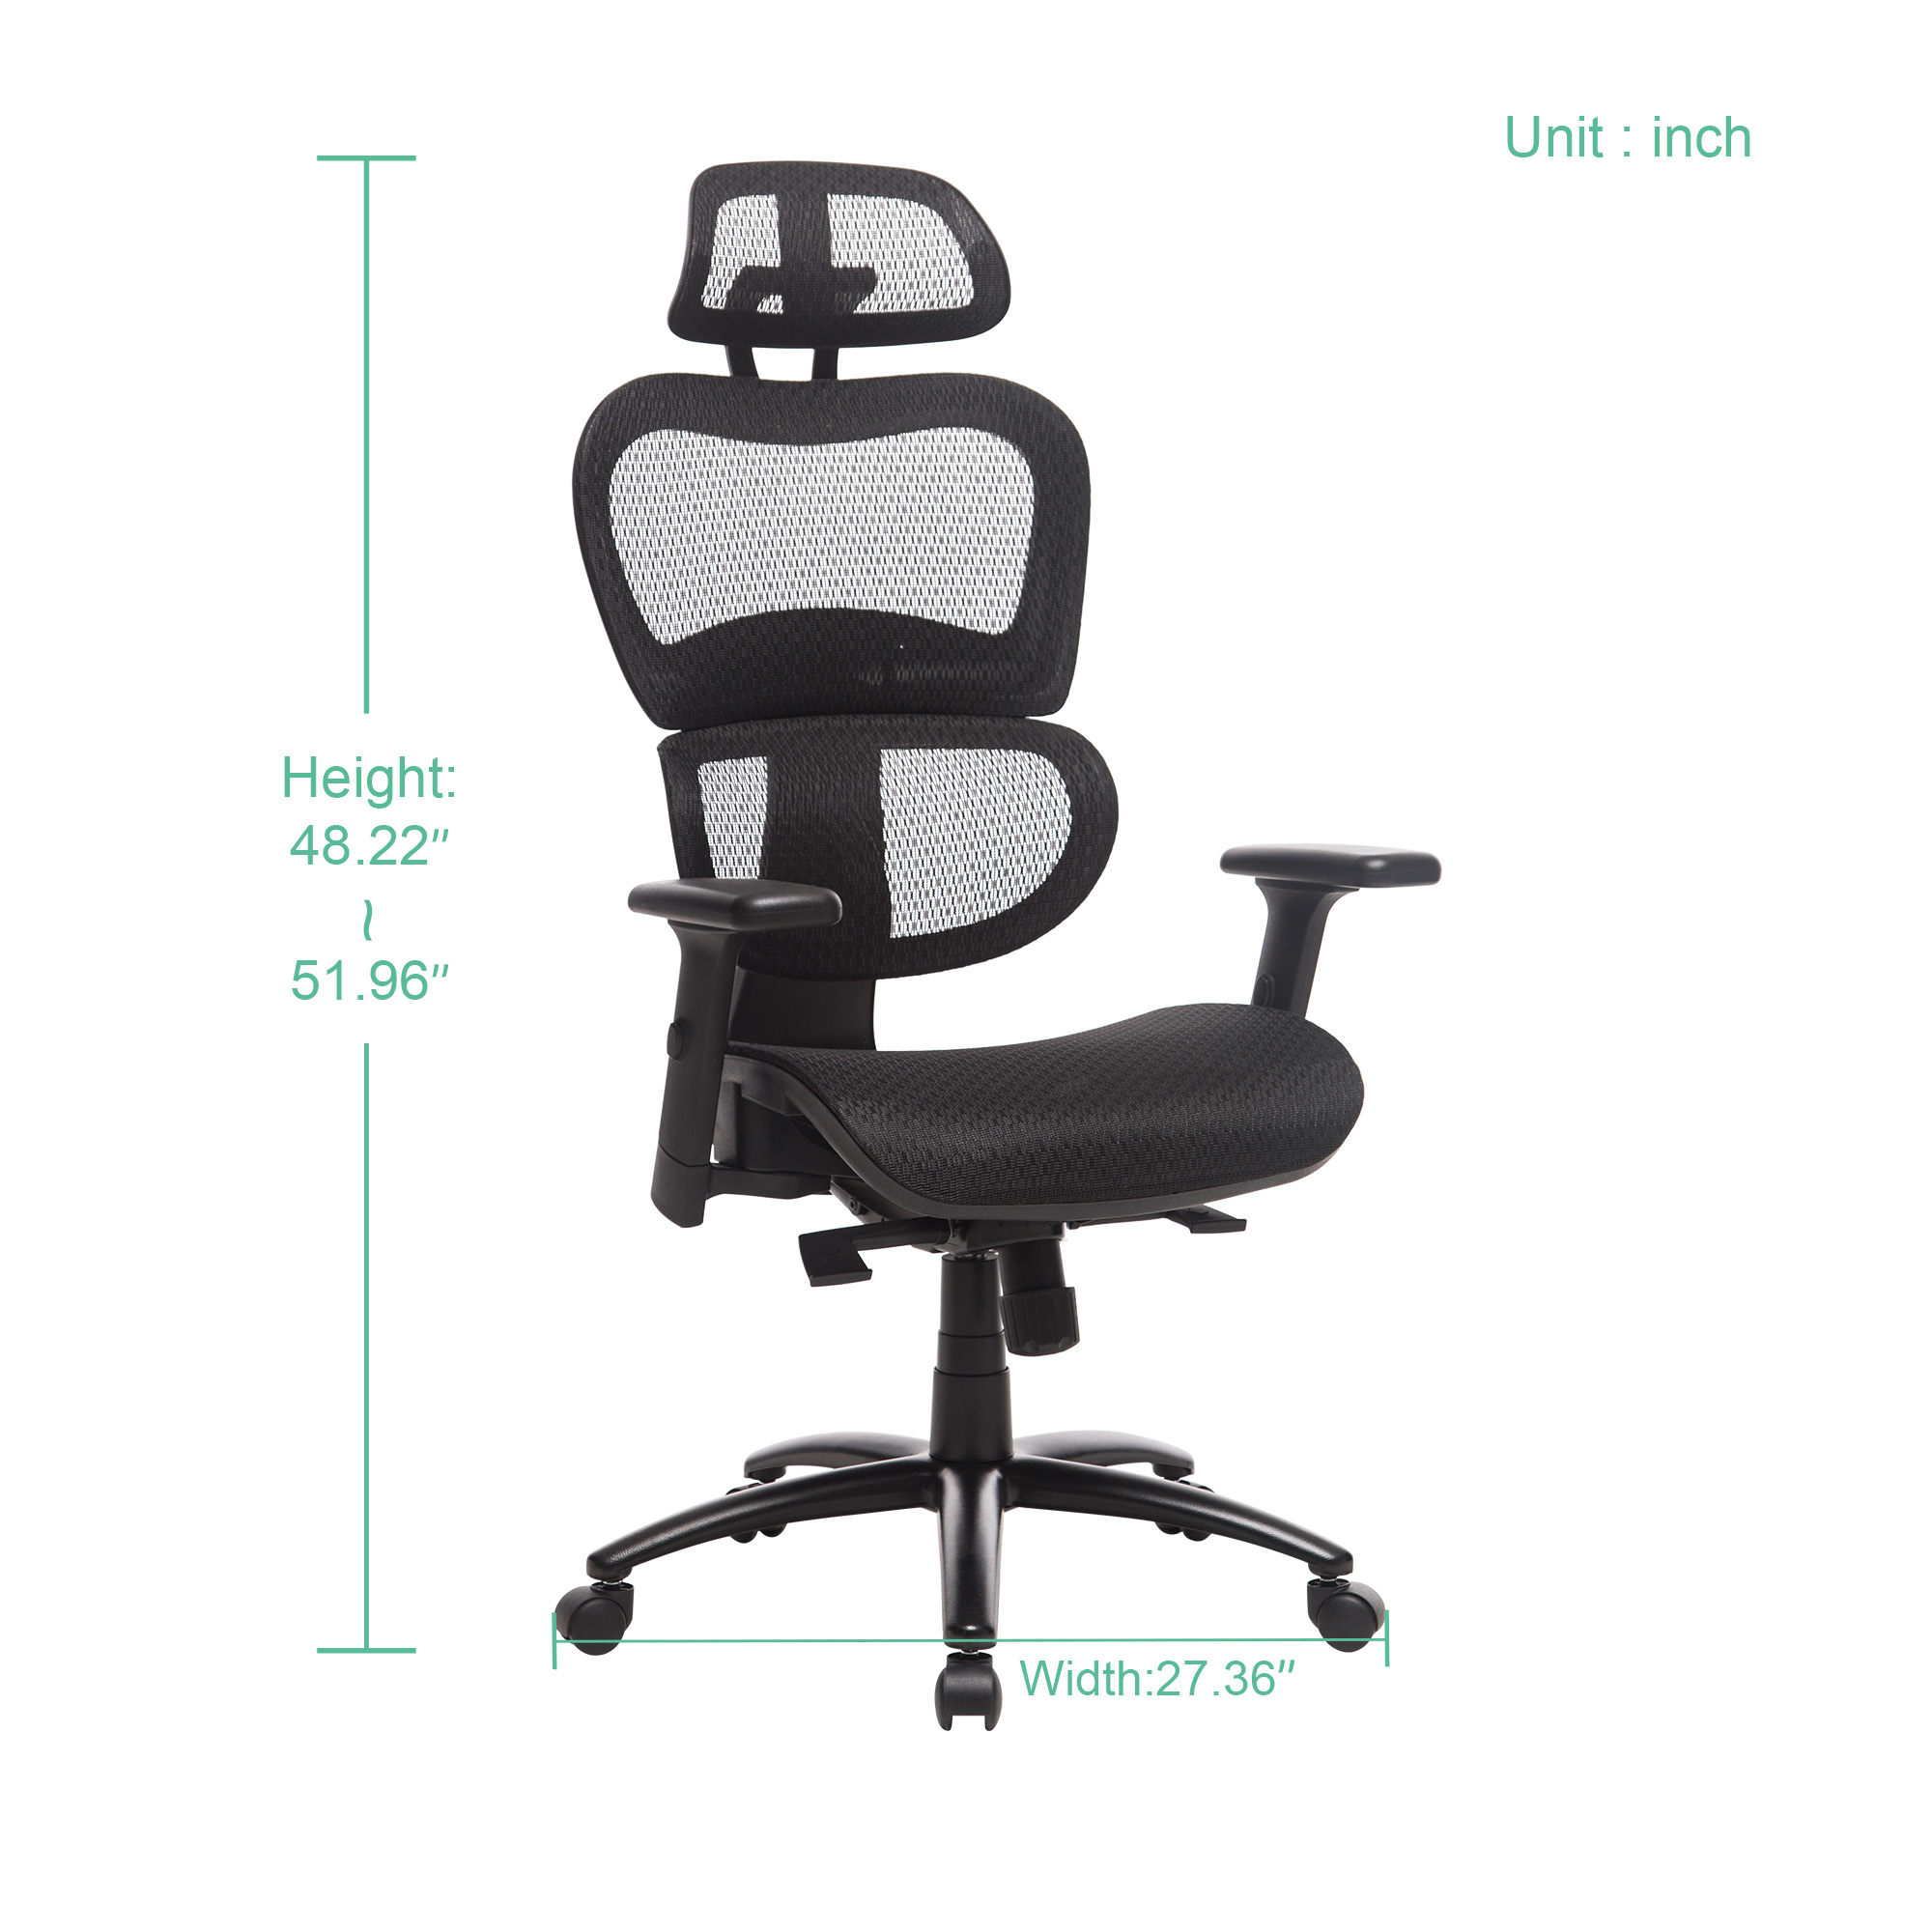 Ergonomic Office Chair Mesh Chair Computer Chair Desk Chair High Back Chair with Adjustable Headrest and Armrest-Black